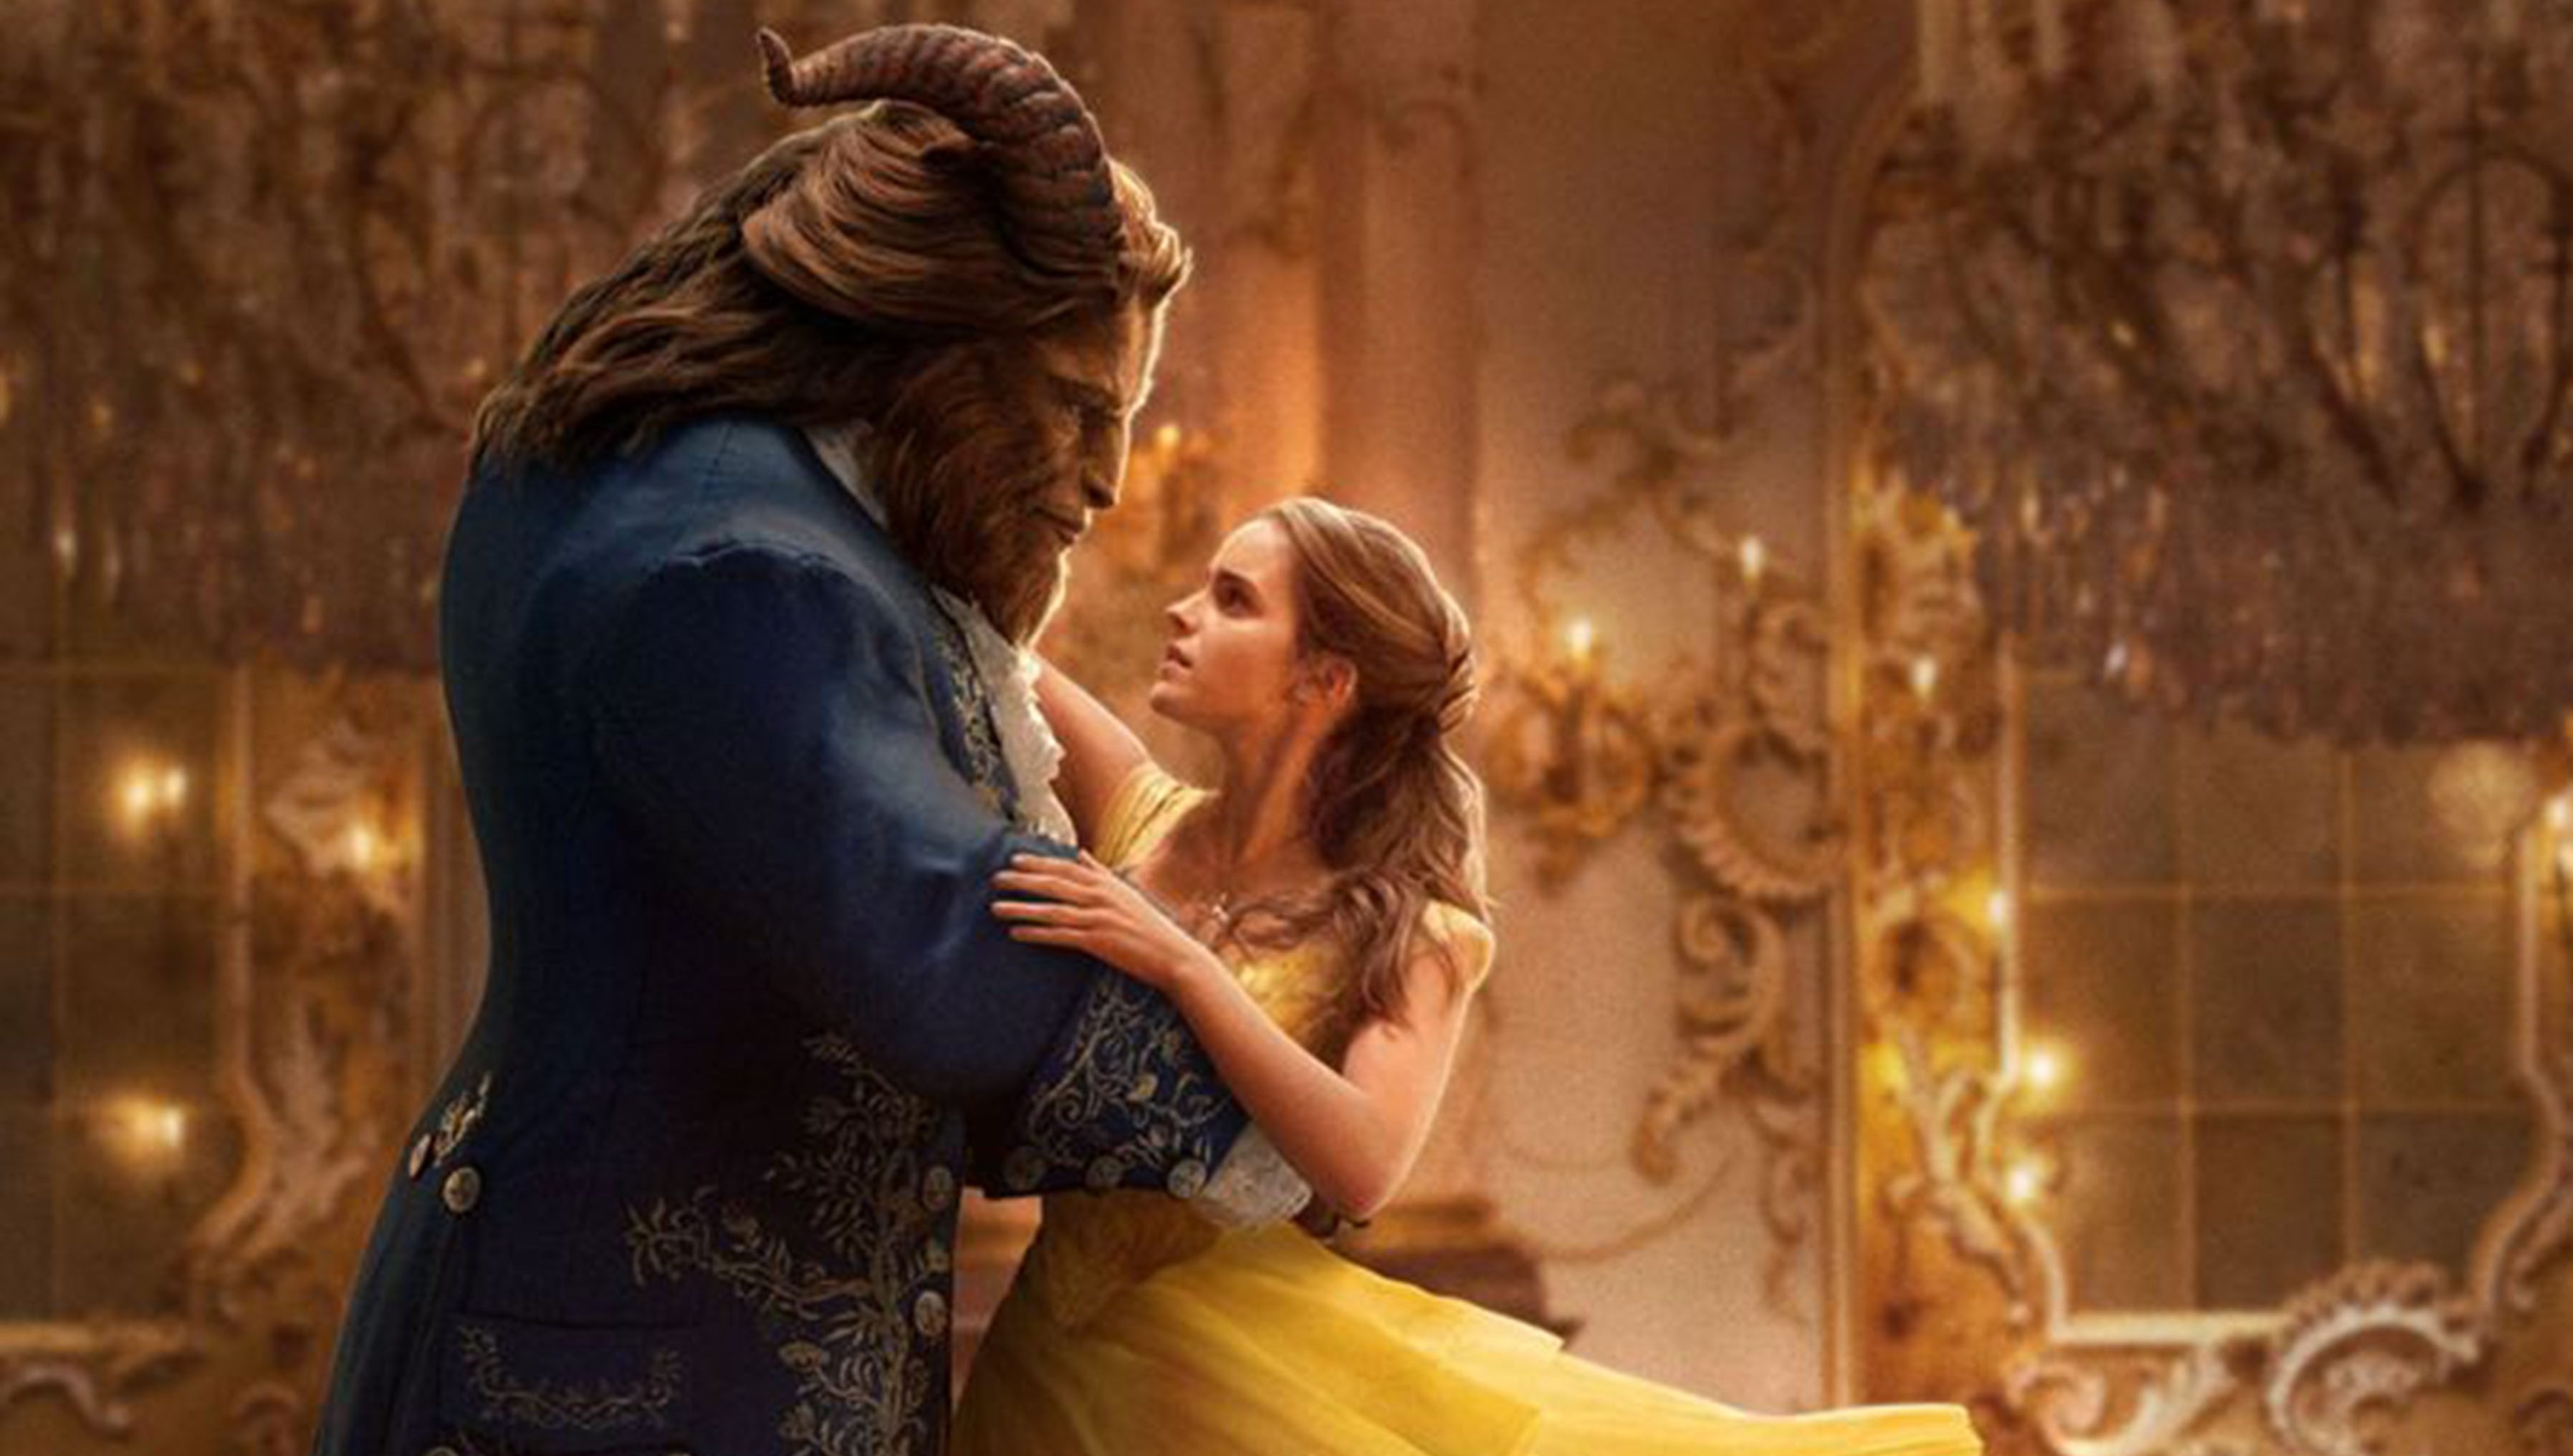 Emma Watson packs a punch in Disney epic Beauty and the Beast